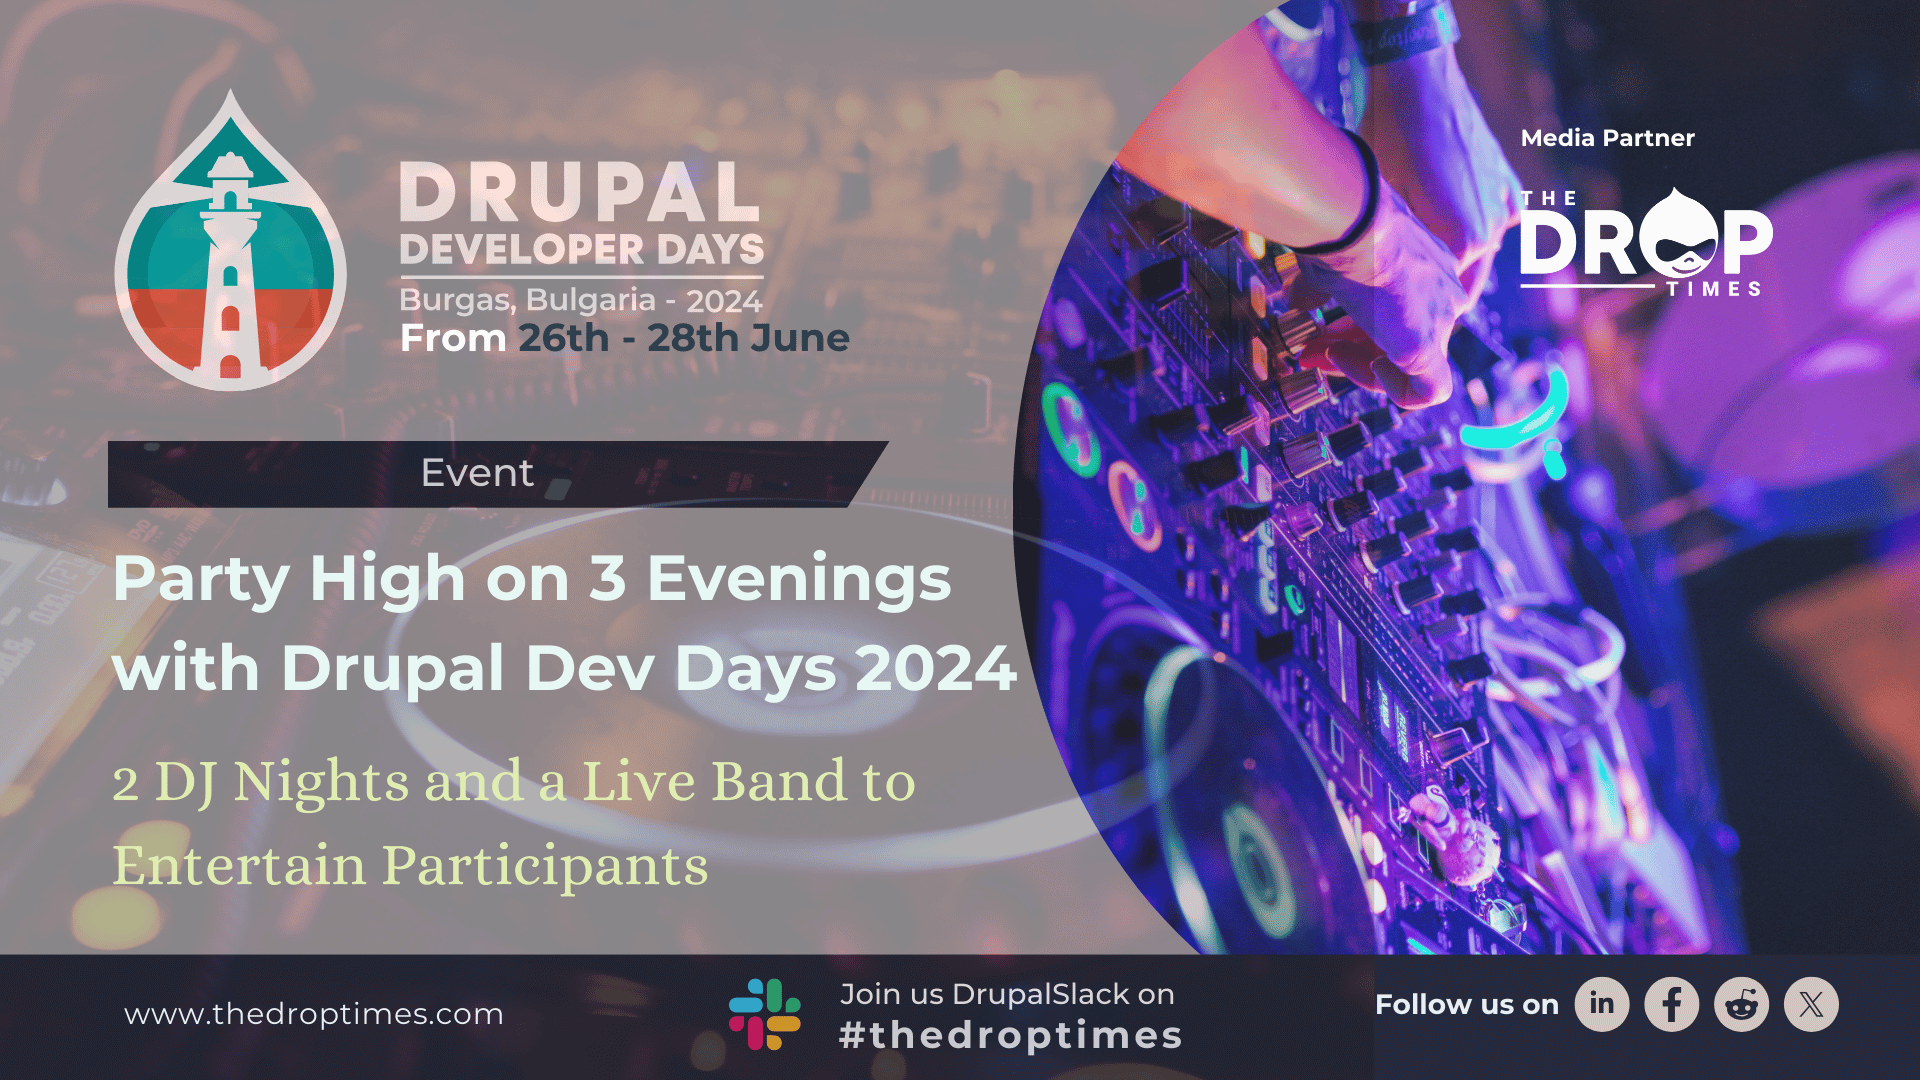 Party High on 3 Evening with Drupal Dev Days 2024